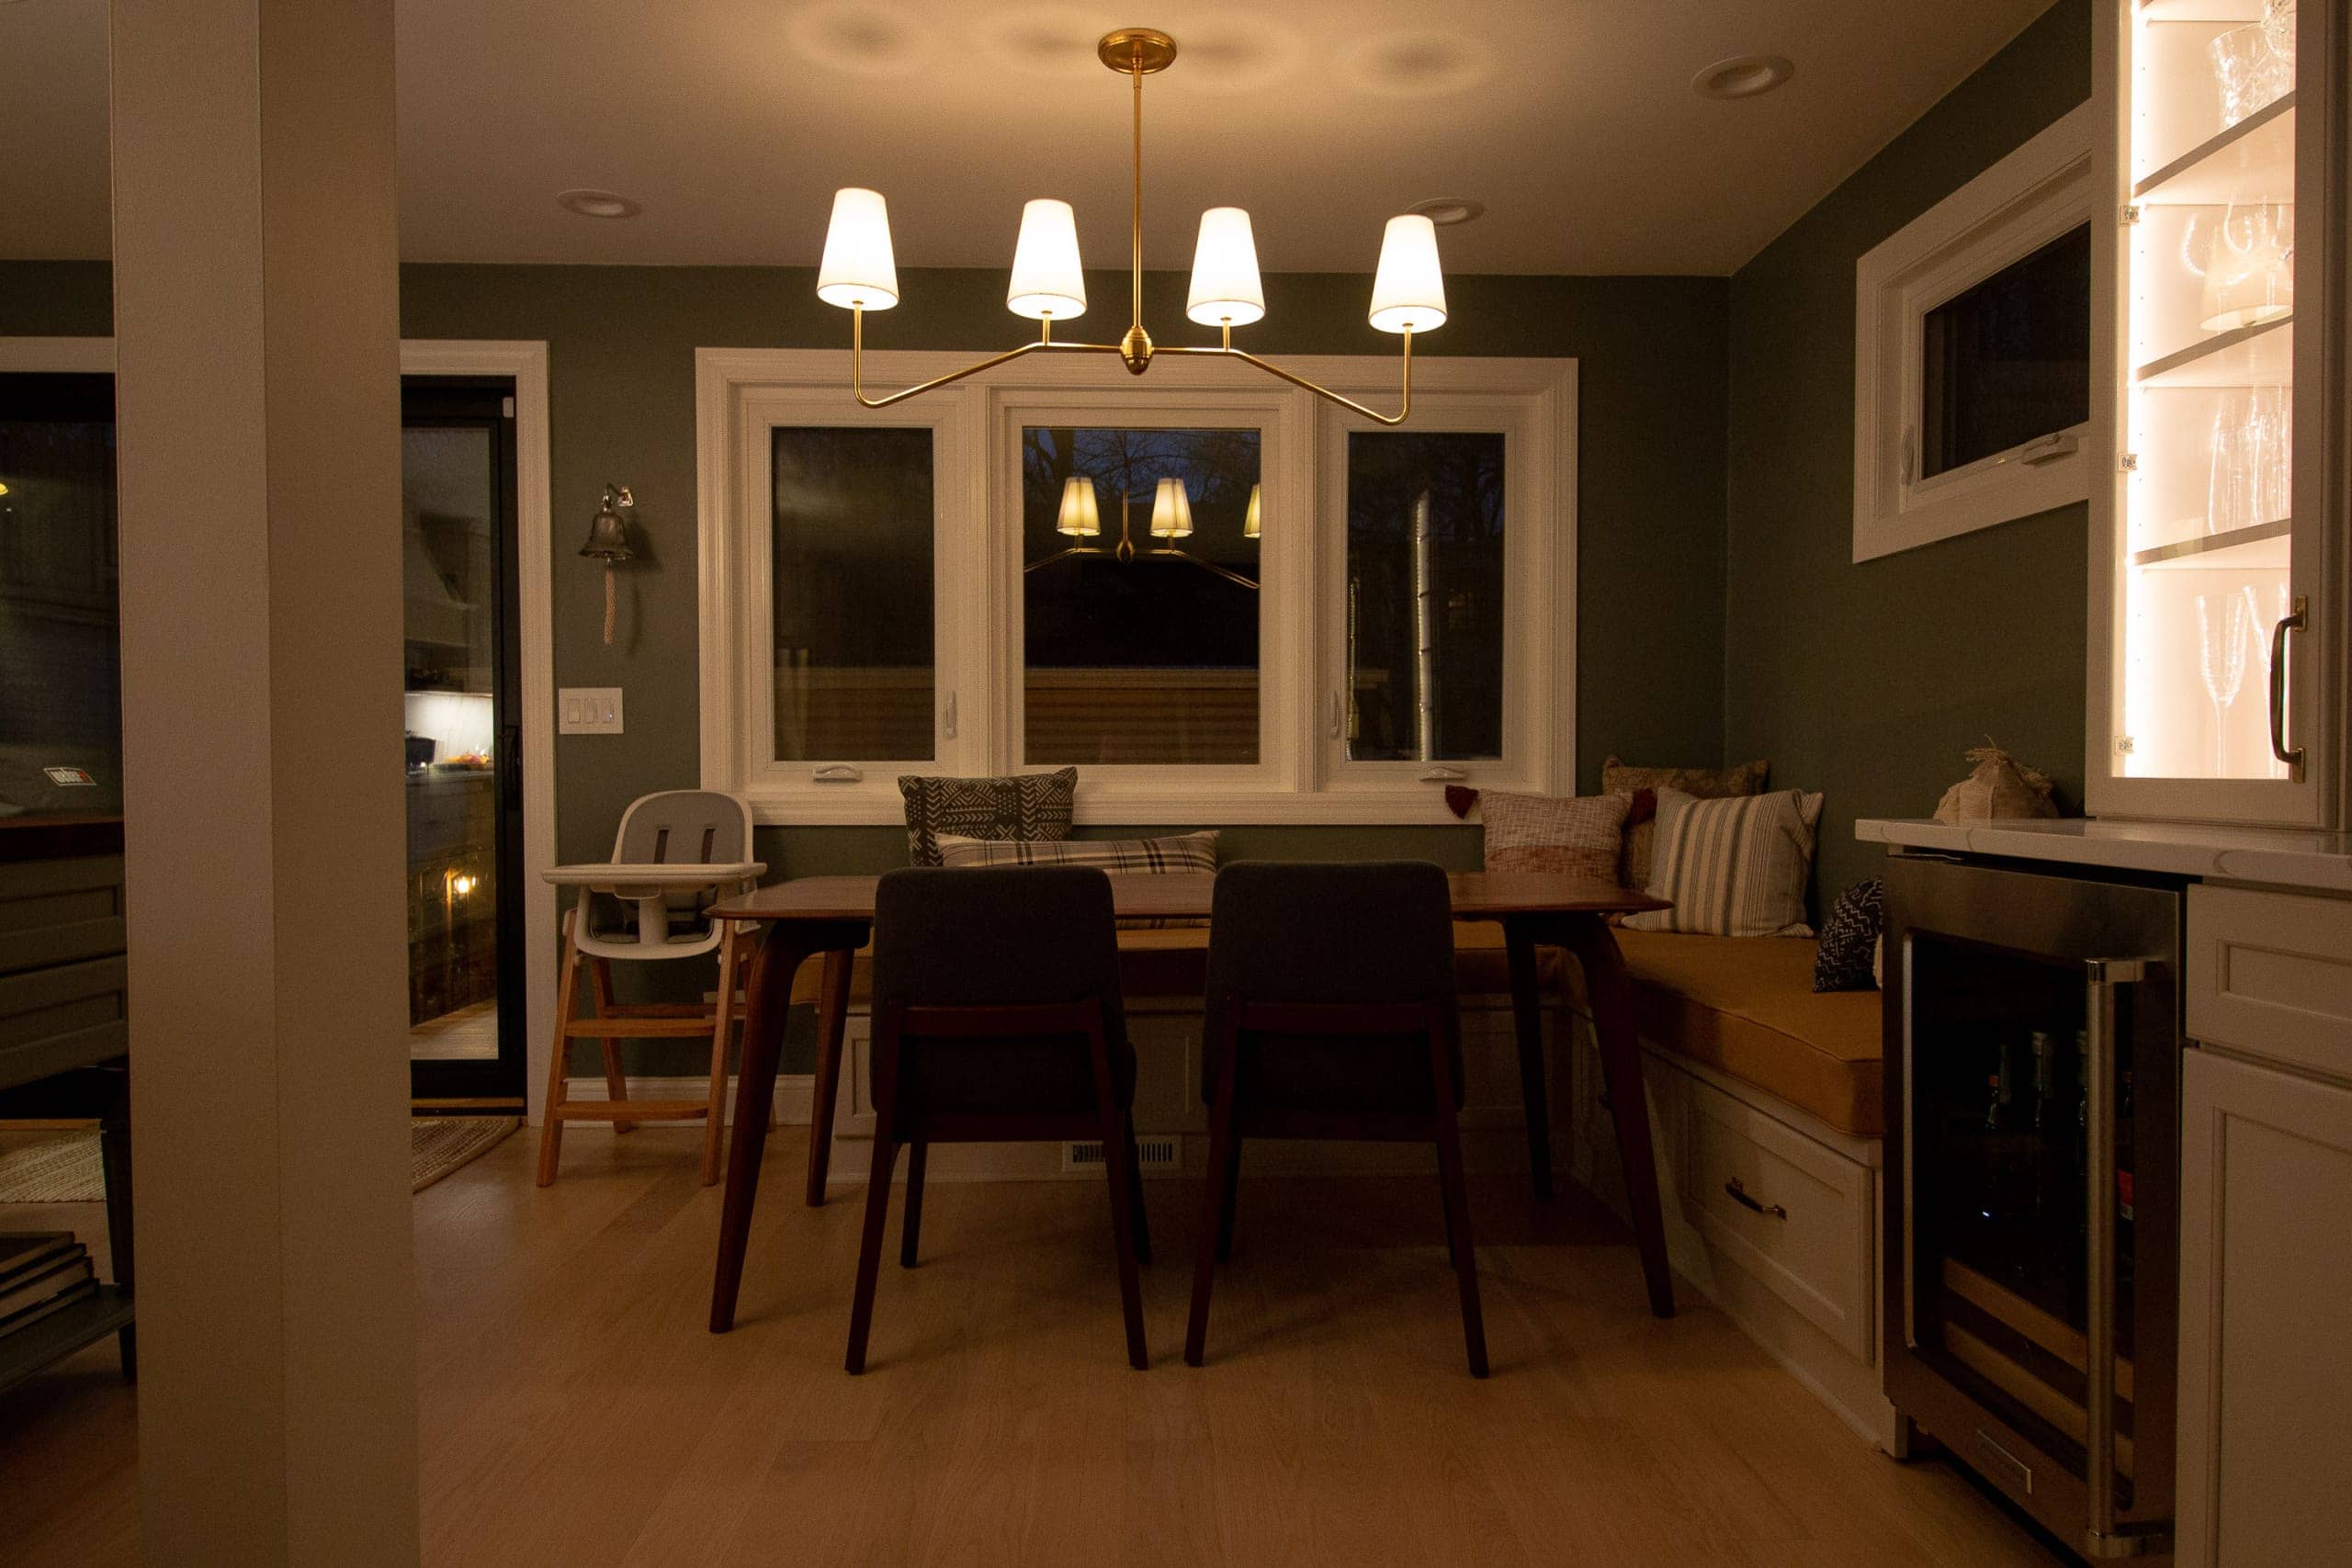 The kitchen and dining room at night